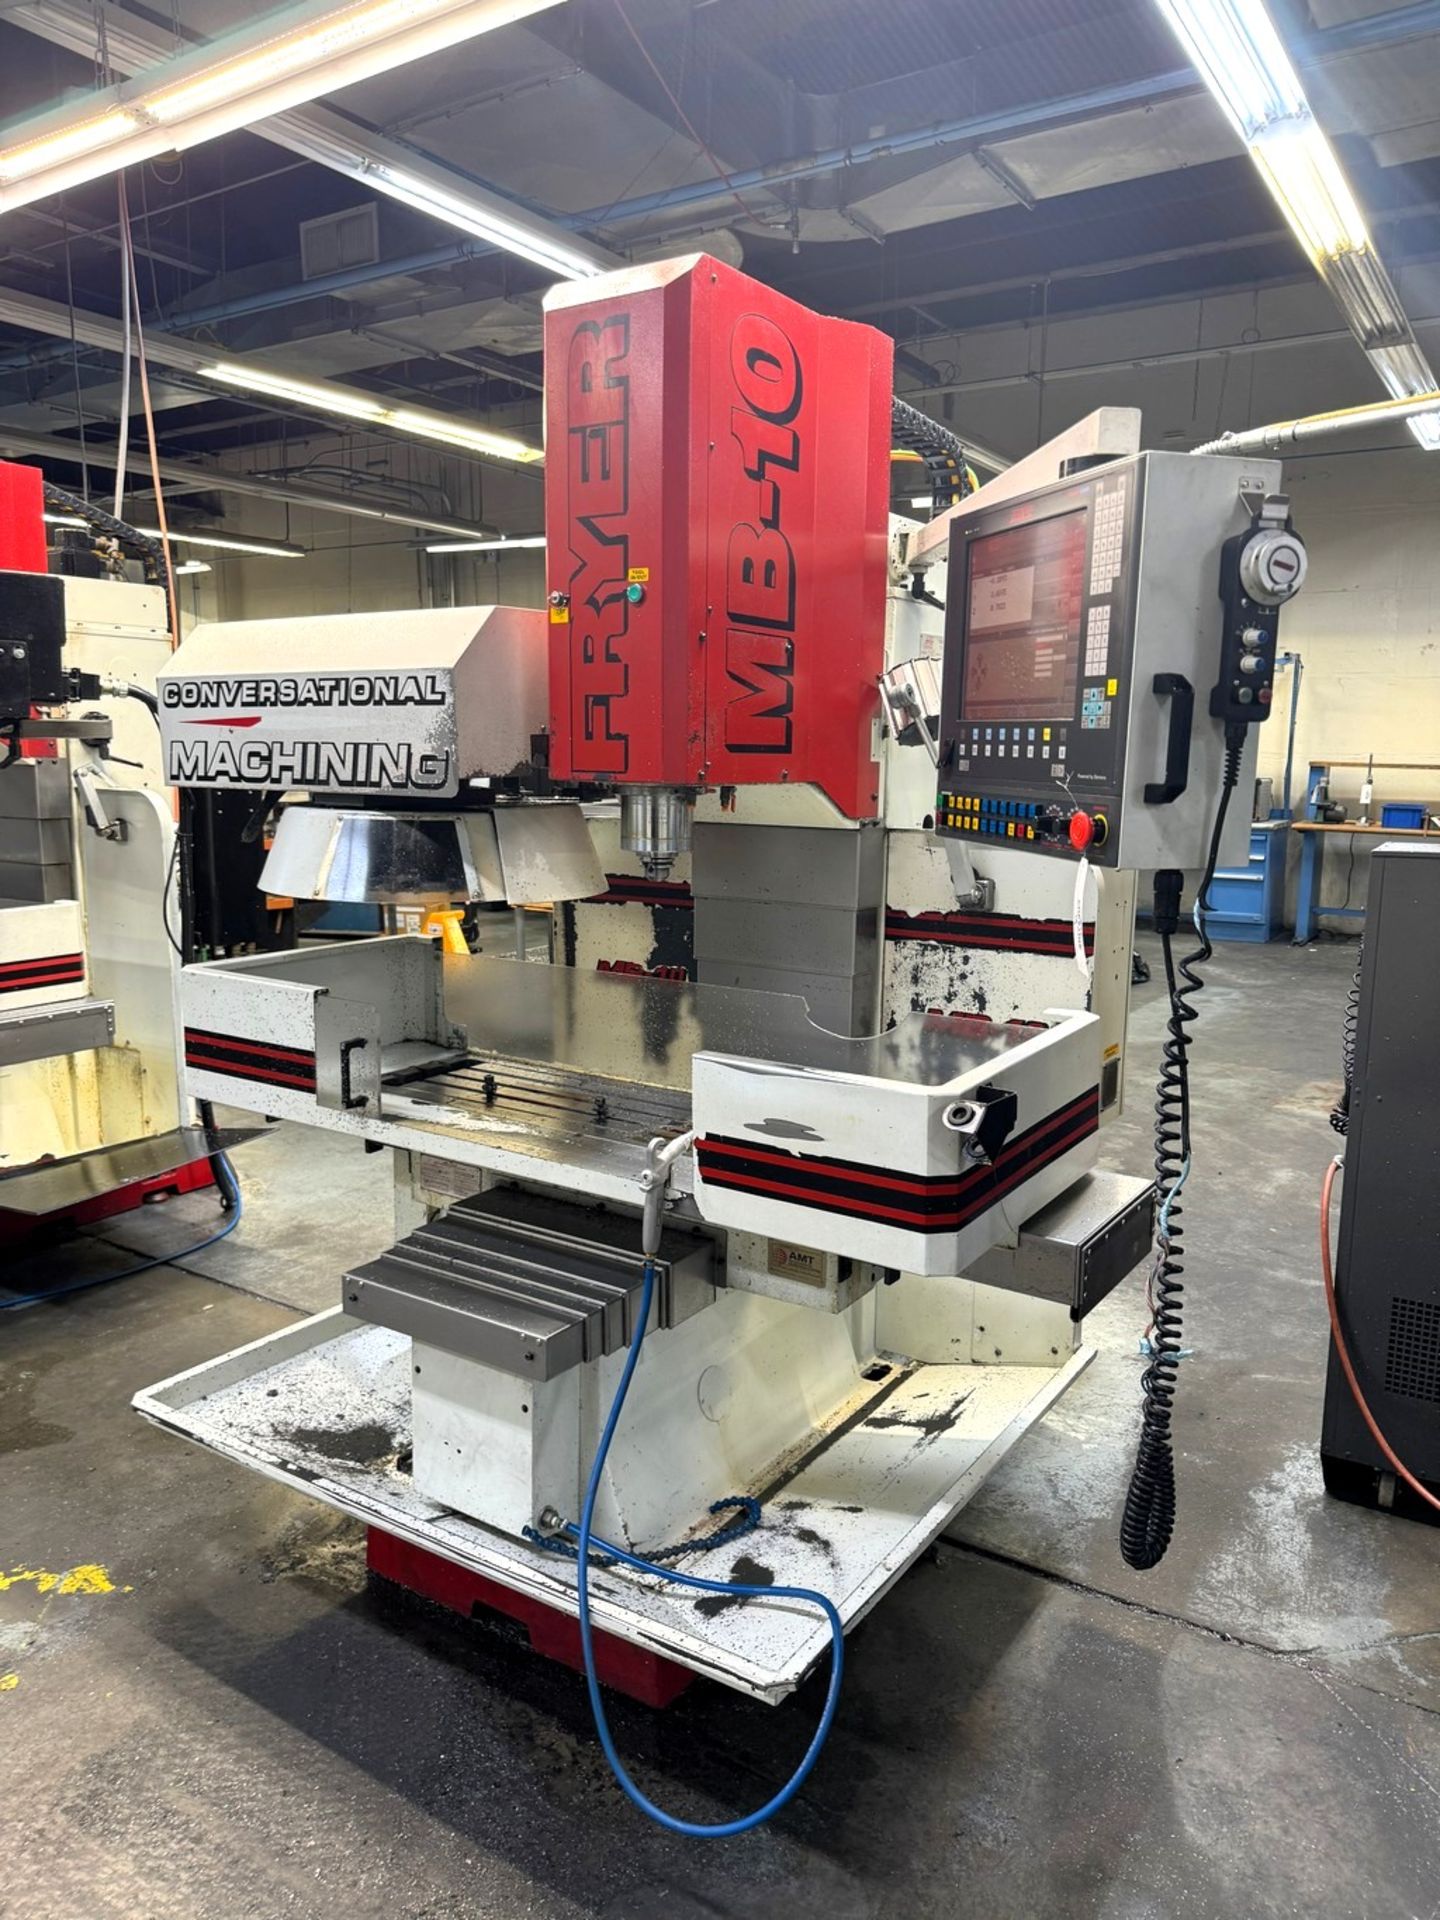 Fryer MB-10R CNC Vertical Mill with ATC - Image 3 of 9